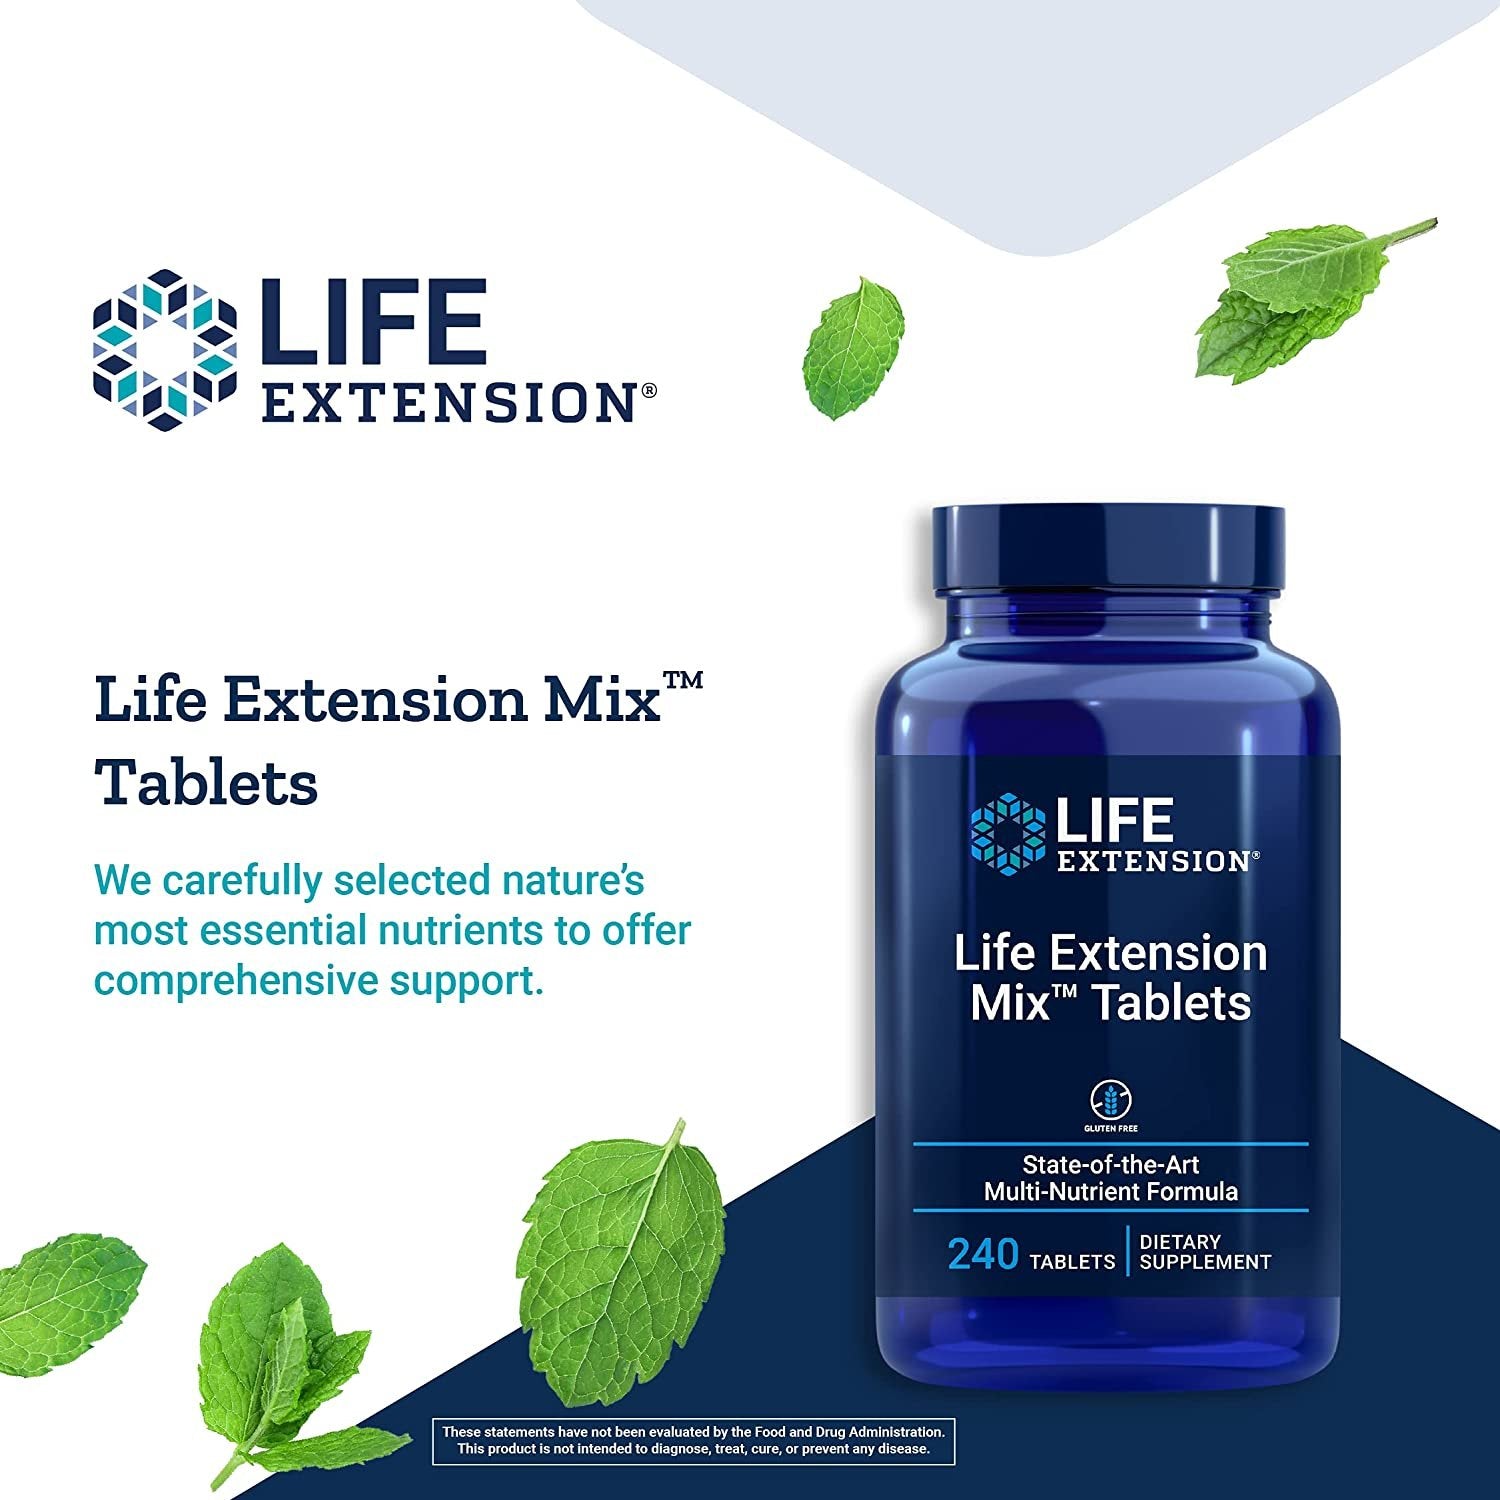 Life Extension Mix Tablets - High-potency Vitamin, Mineral, Fruit And Vegetable Supplement - Complete Daily Veggies Blend Pills For Whole Body Health, Immunity & Longevity - Gluten Free - 240 Tablets